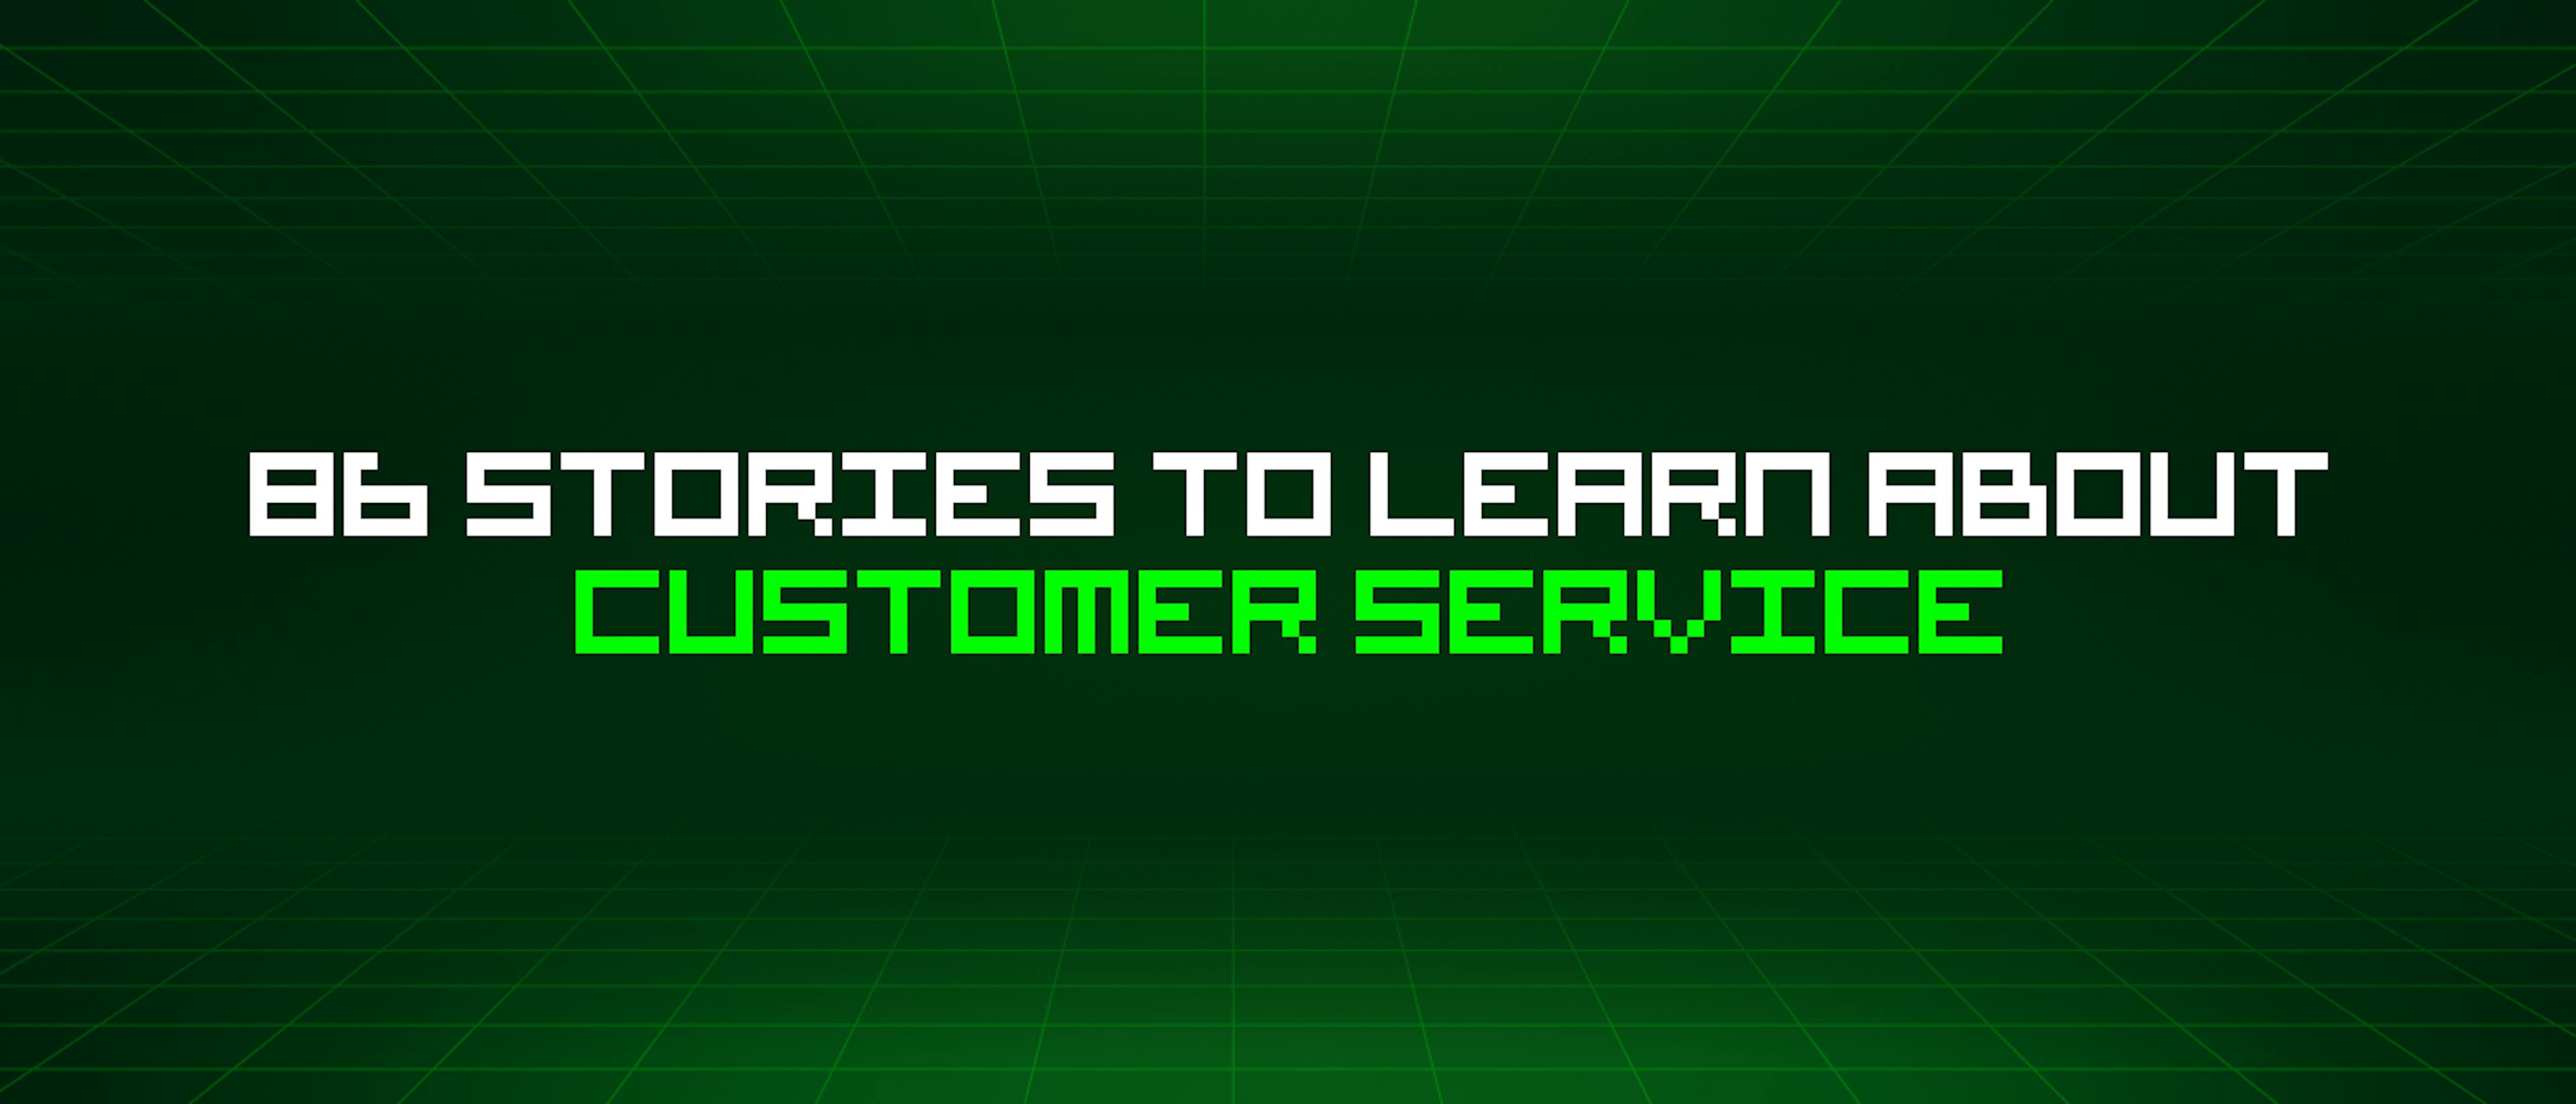 featured image - 86 Stories To Learn About Customer Service